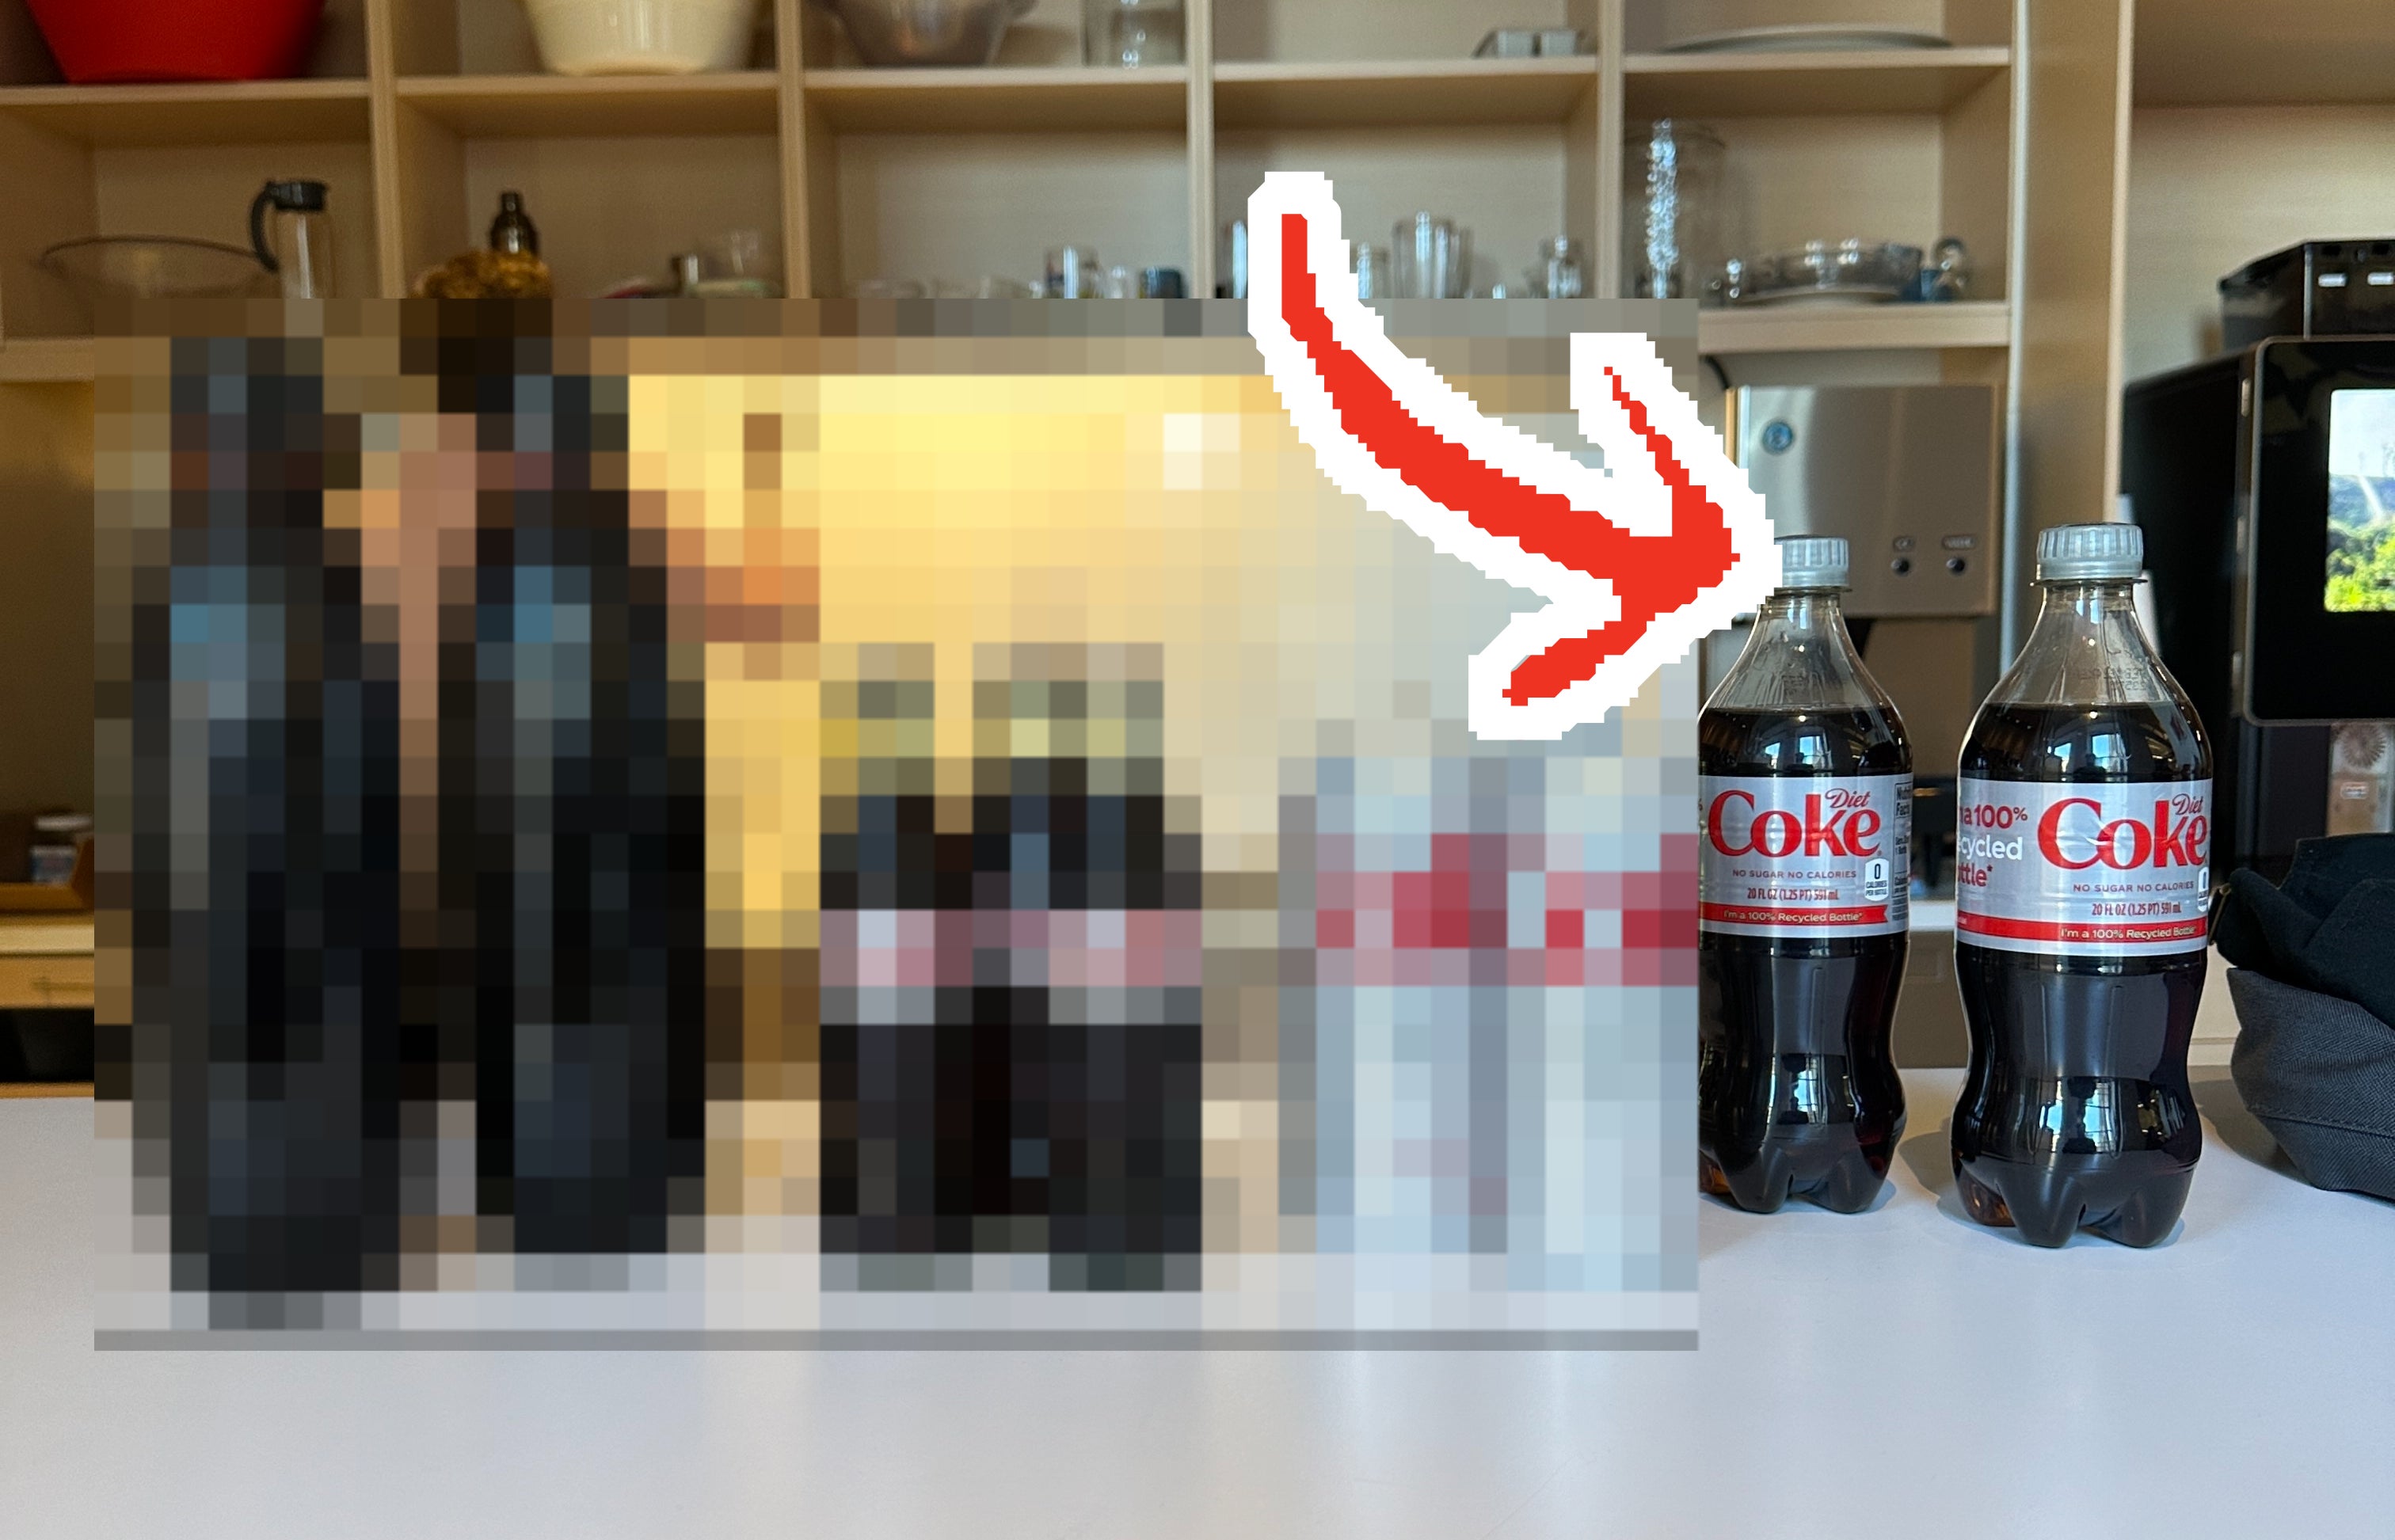 The four different types of Diet Coke lined up on a table, with an arrow pointing to the plastic bottle